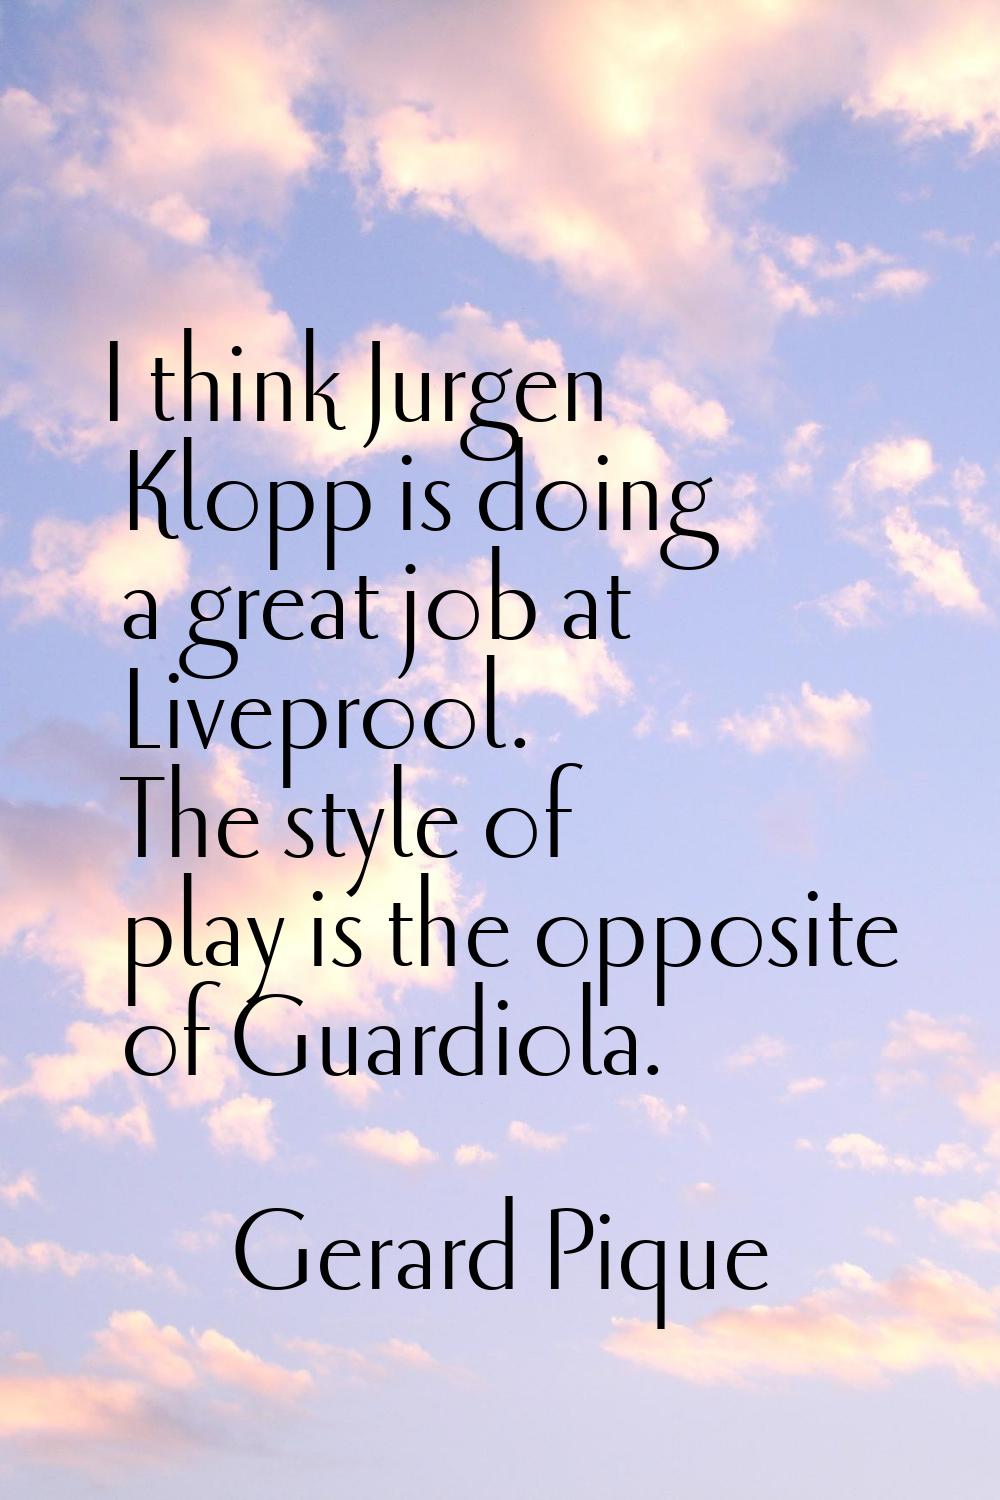 I think Jurgen Klopp is doing a great job at Liveprool. The style of play is the opposite of Guardi